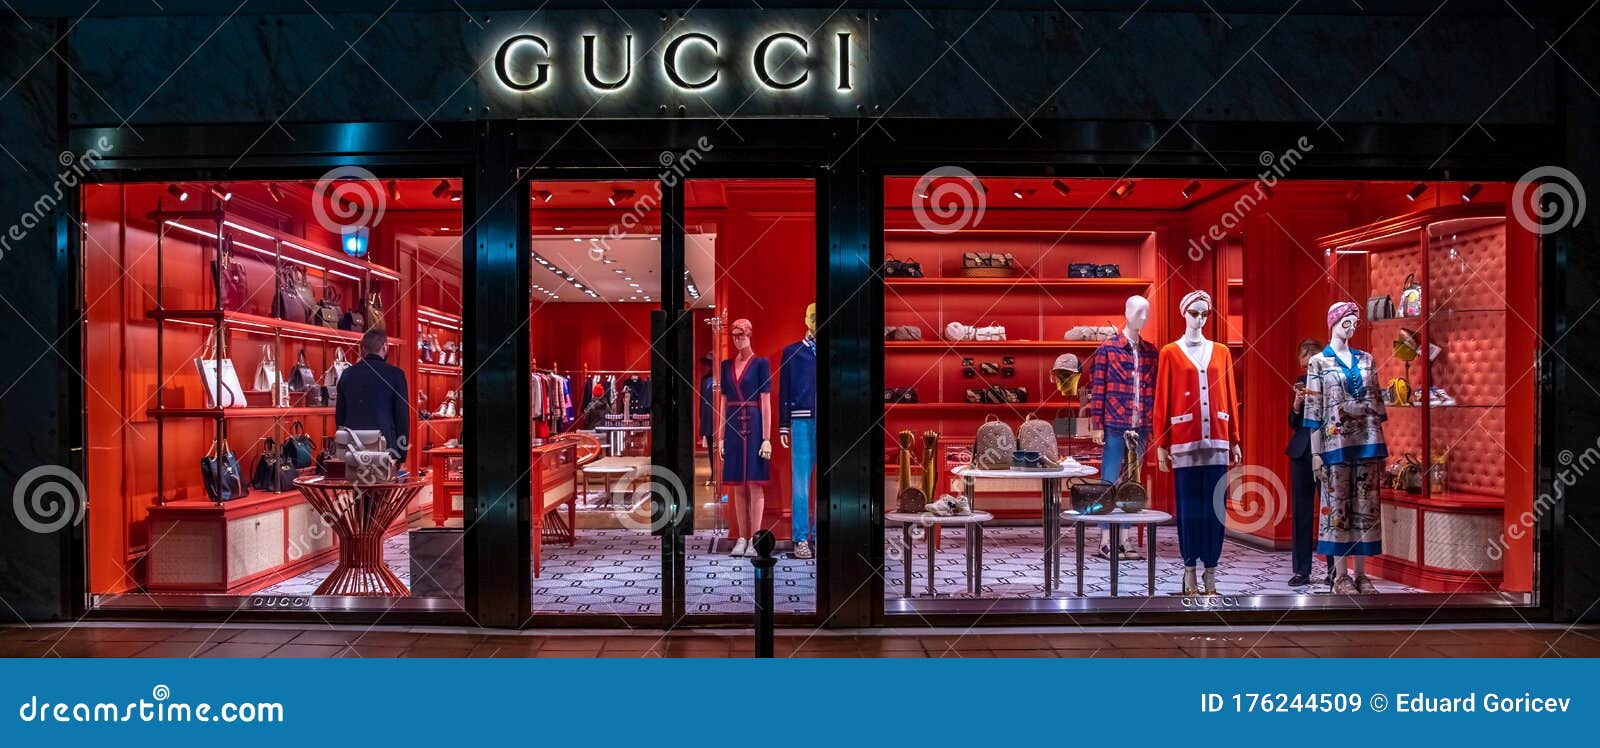 Marbella - January 13, 2020: Shop Window of Gucci Shop on Night Street Editorial Stock Image - of glamor, city: 176244509